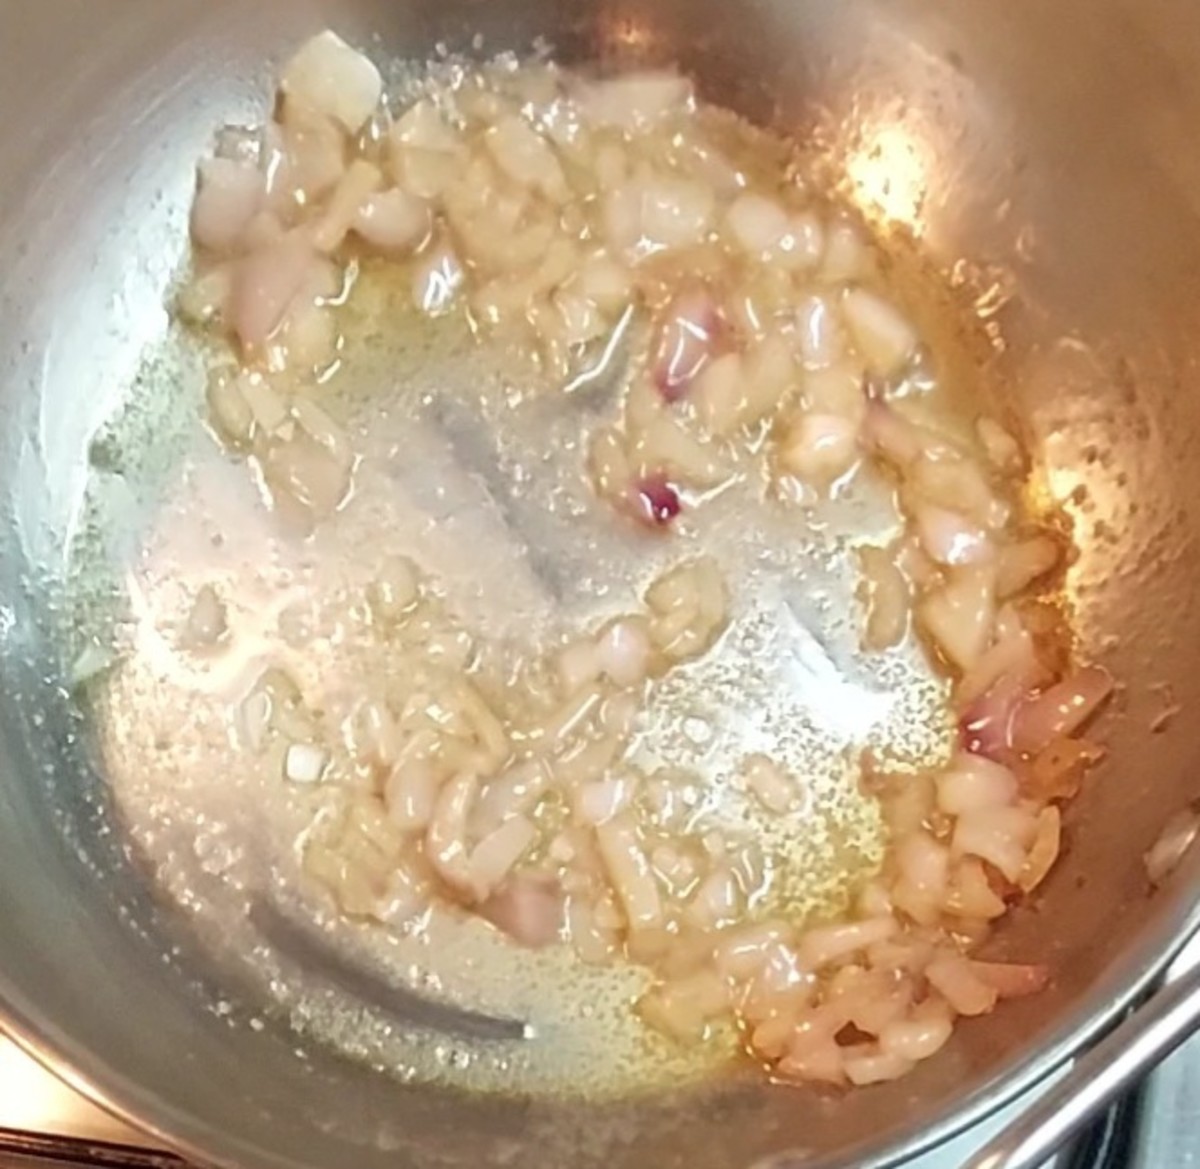 Add 1/2 cup onion and fry till golden brown.